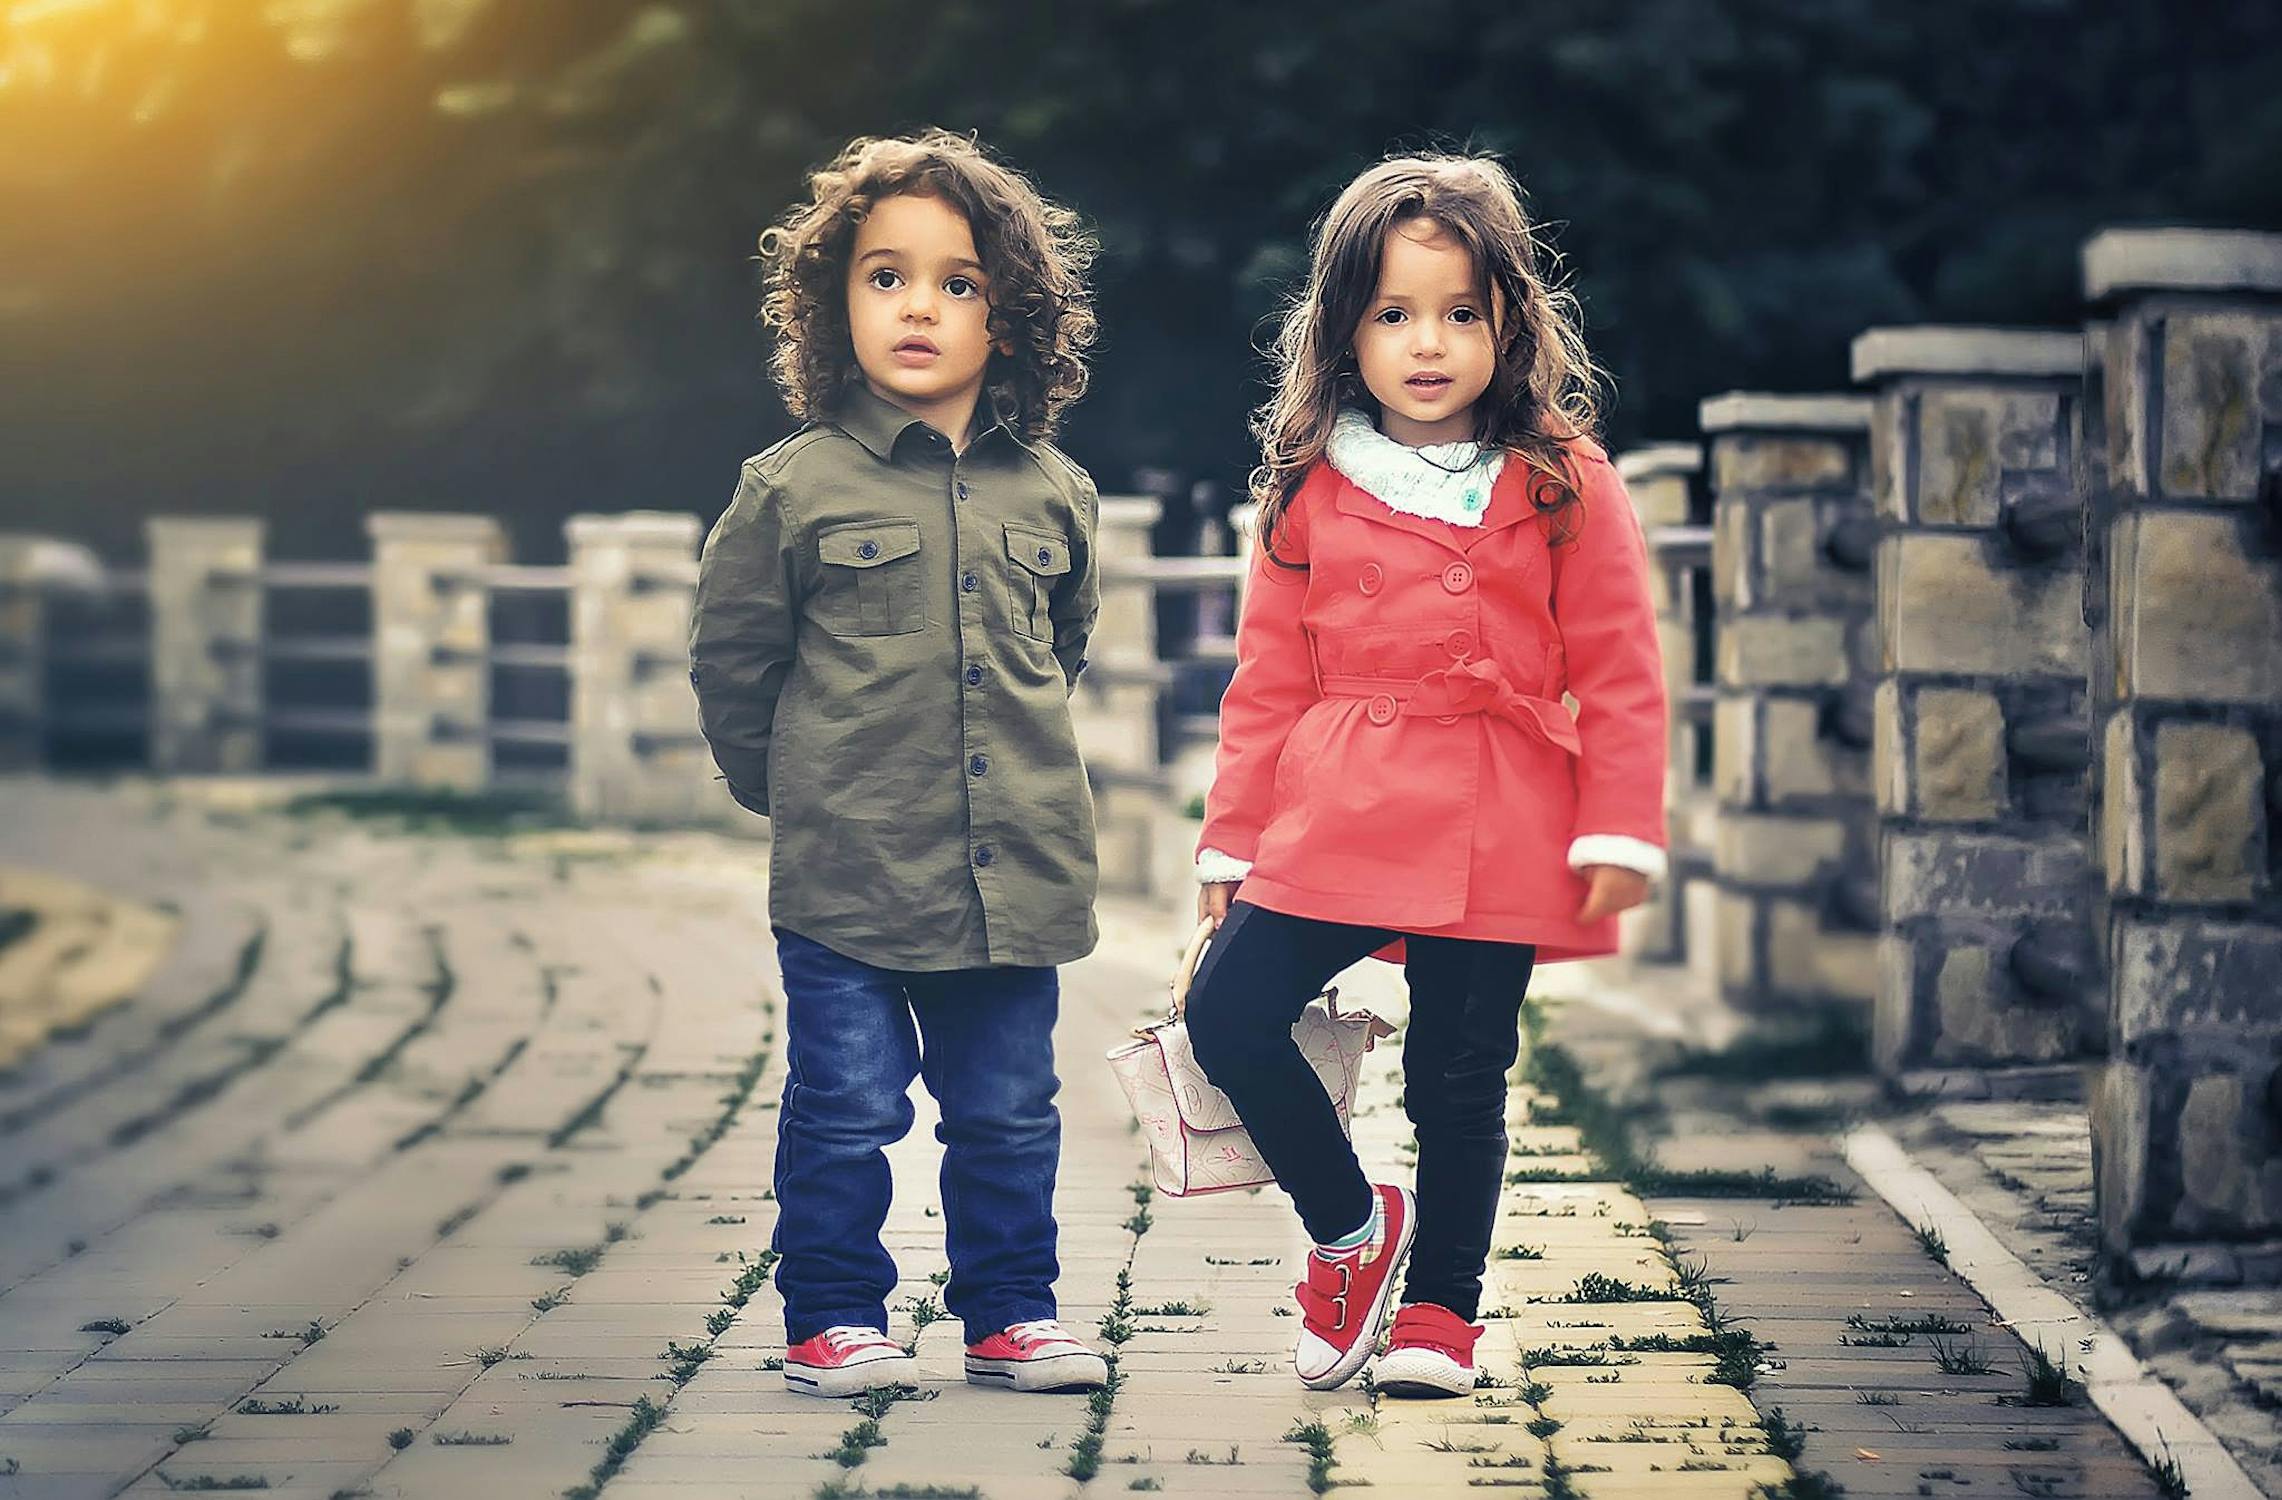 Baby girl Photo by Bess Hamiti from Pexels: https://www.pexels.com/photo/two-children-standing-near-concrete-fence-35188/